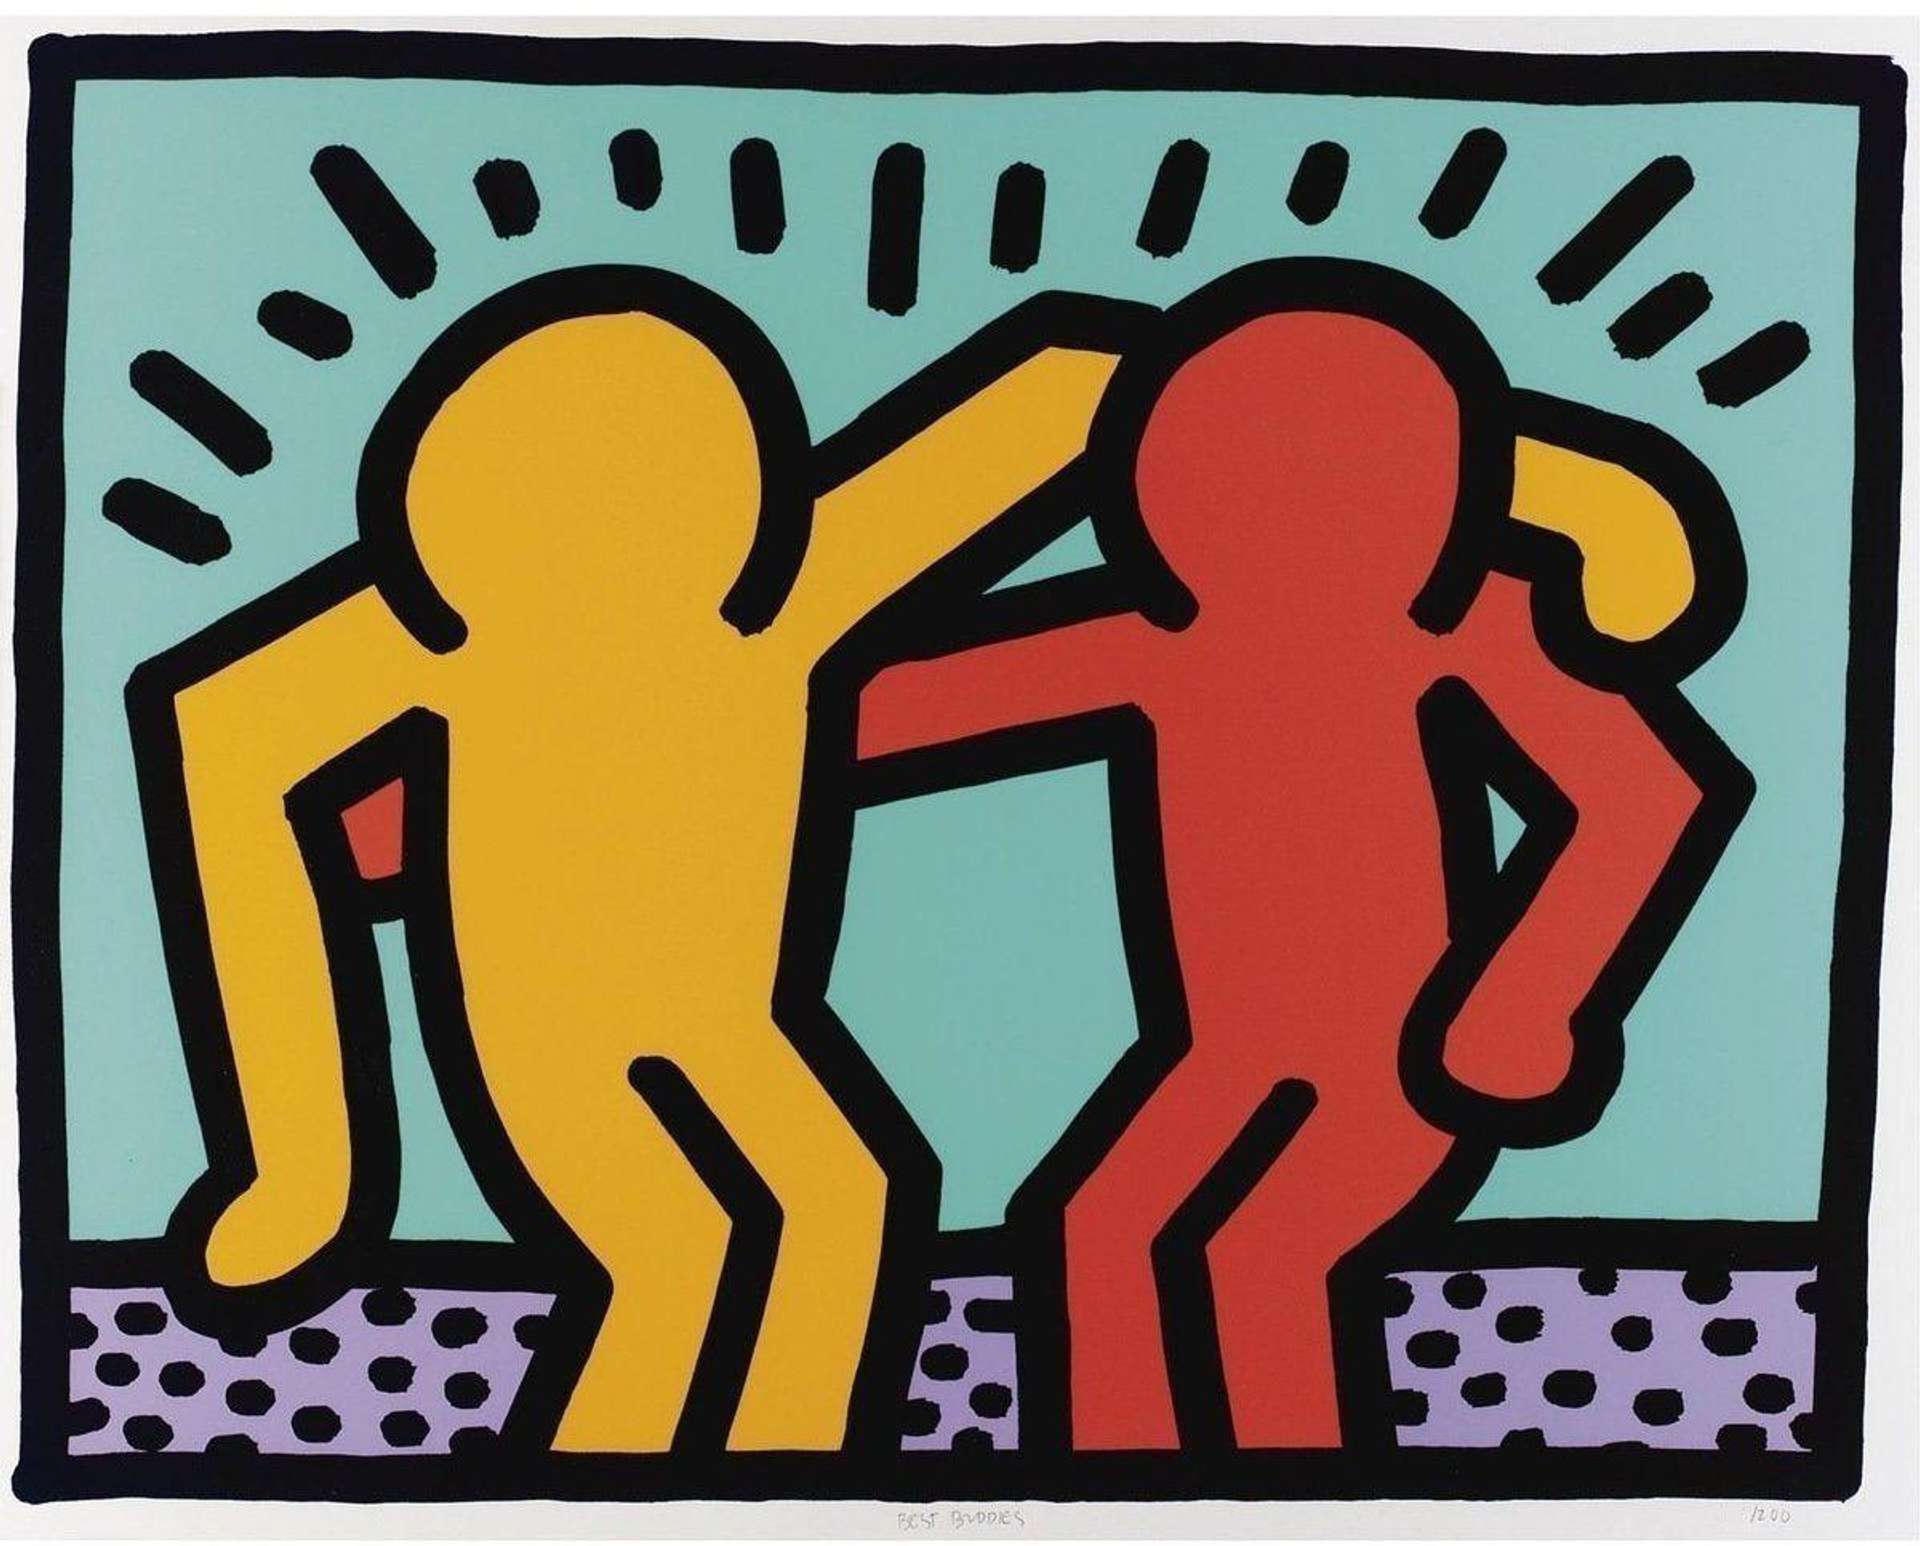 This print by Keith Haring shows two figures in yellow and orange with their arms around one another, set against a turquoise backdrop and purple landscape.